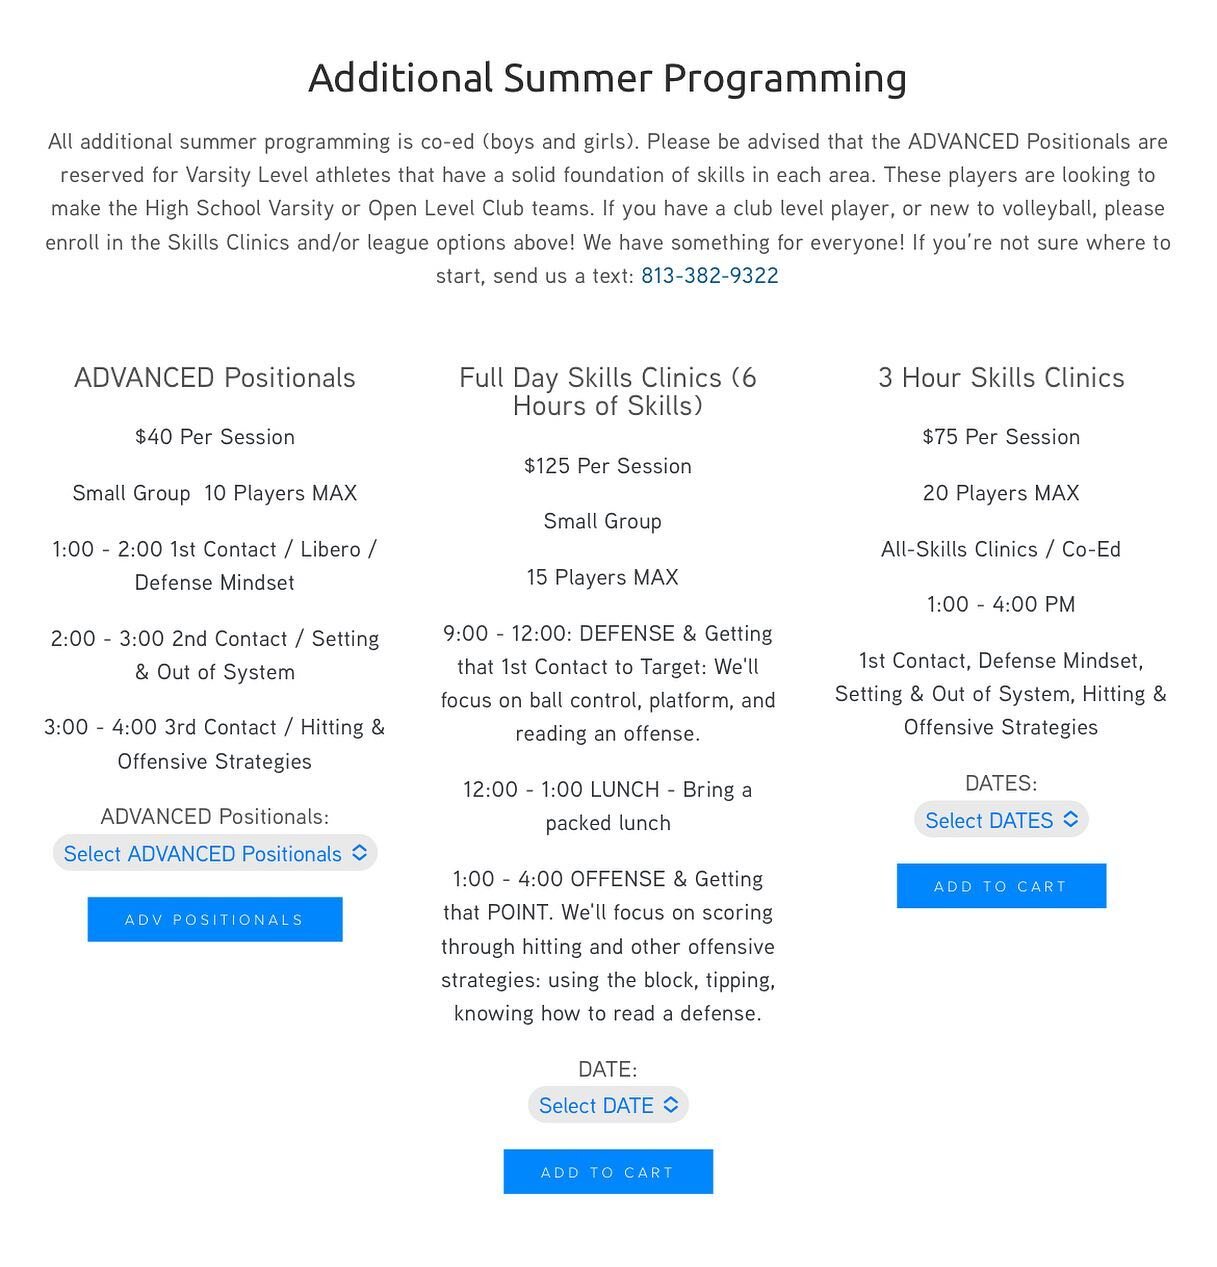 &bull; Additional Summer Programming &bull;

All additional summer programming is co-ed (boys and girls)!

Please be advised that the ADVANCED Positionals are reserved for Varsity Level athletes that have a solid foundation of skills in each area. Th